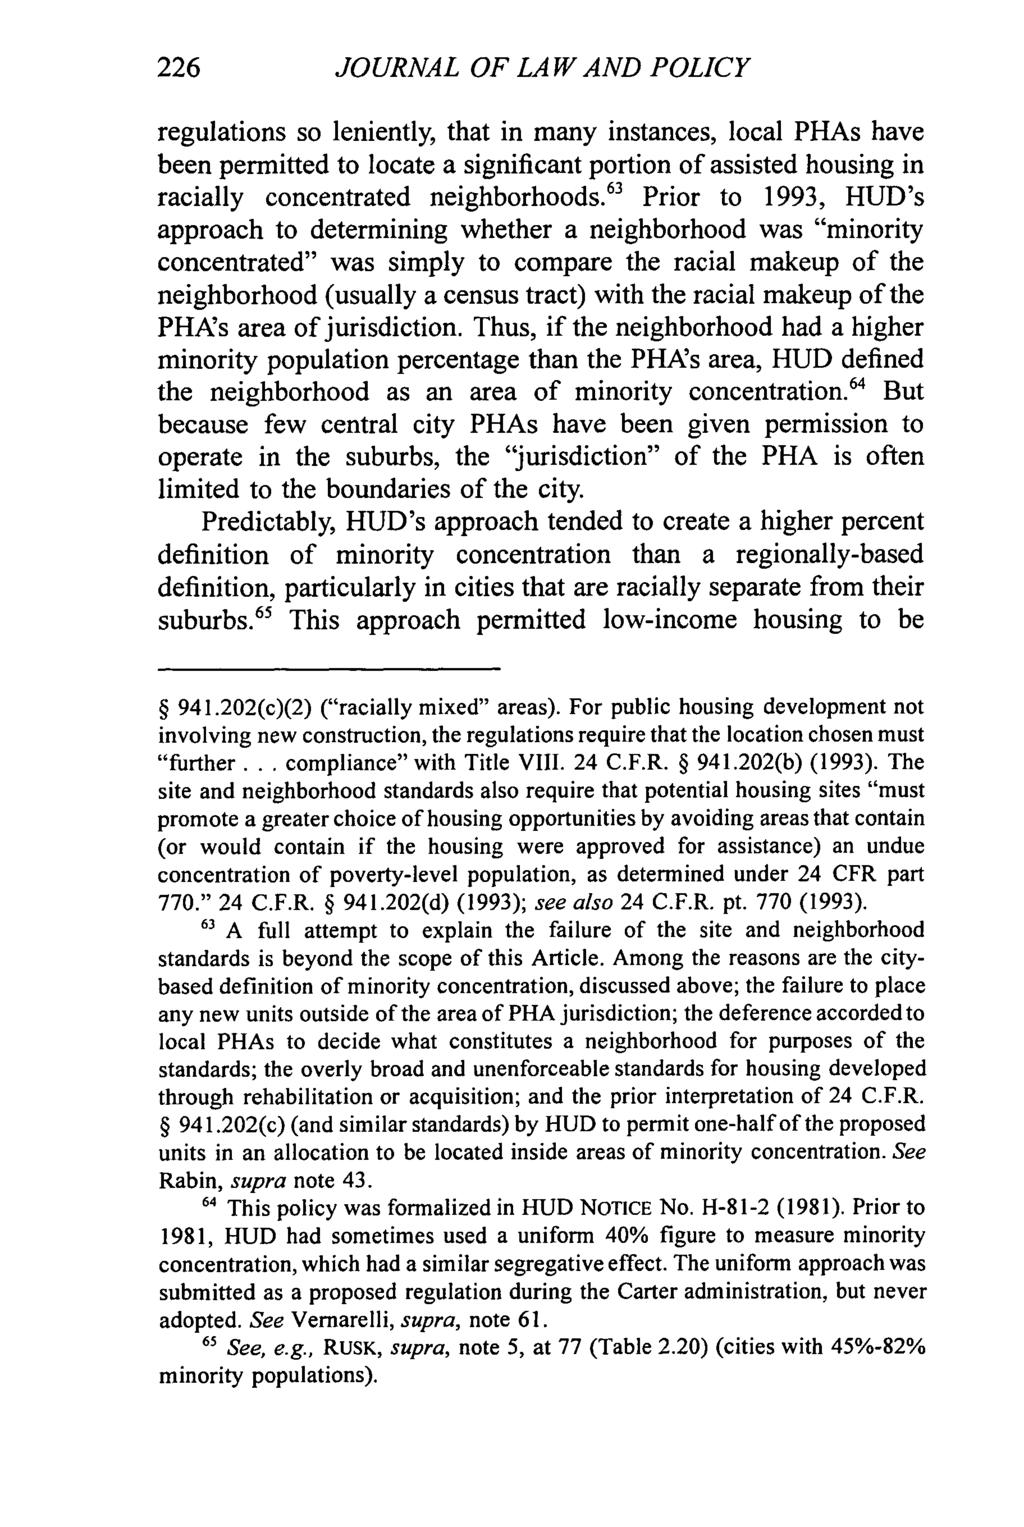 226 JOURNAL OF LAW AND POLICY regulations so leniently, that in many instances, local PHAs have been permitted to locate a significant portion of assisted housing in racially concentrated